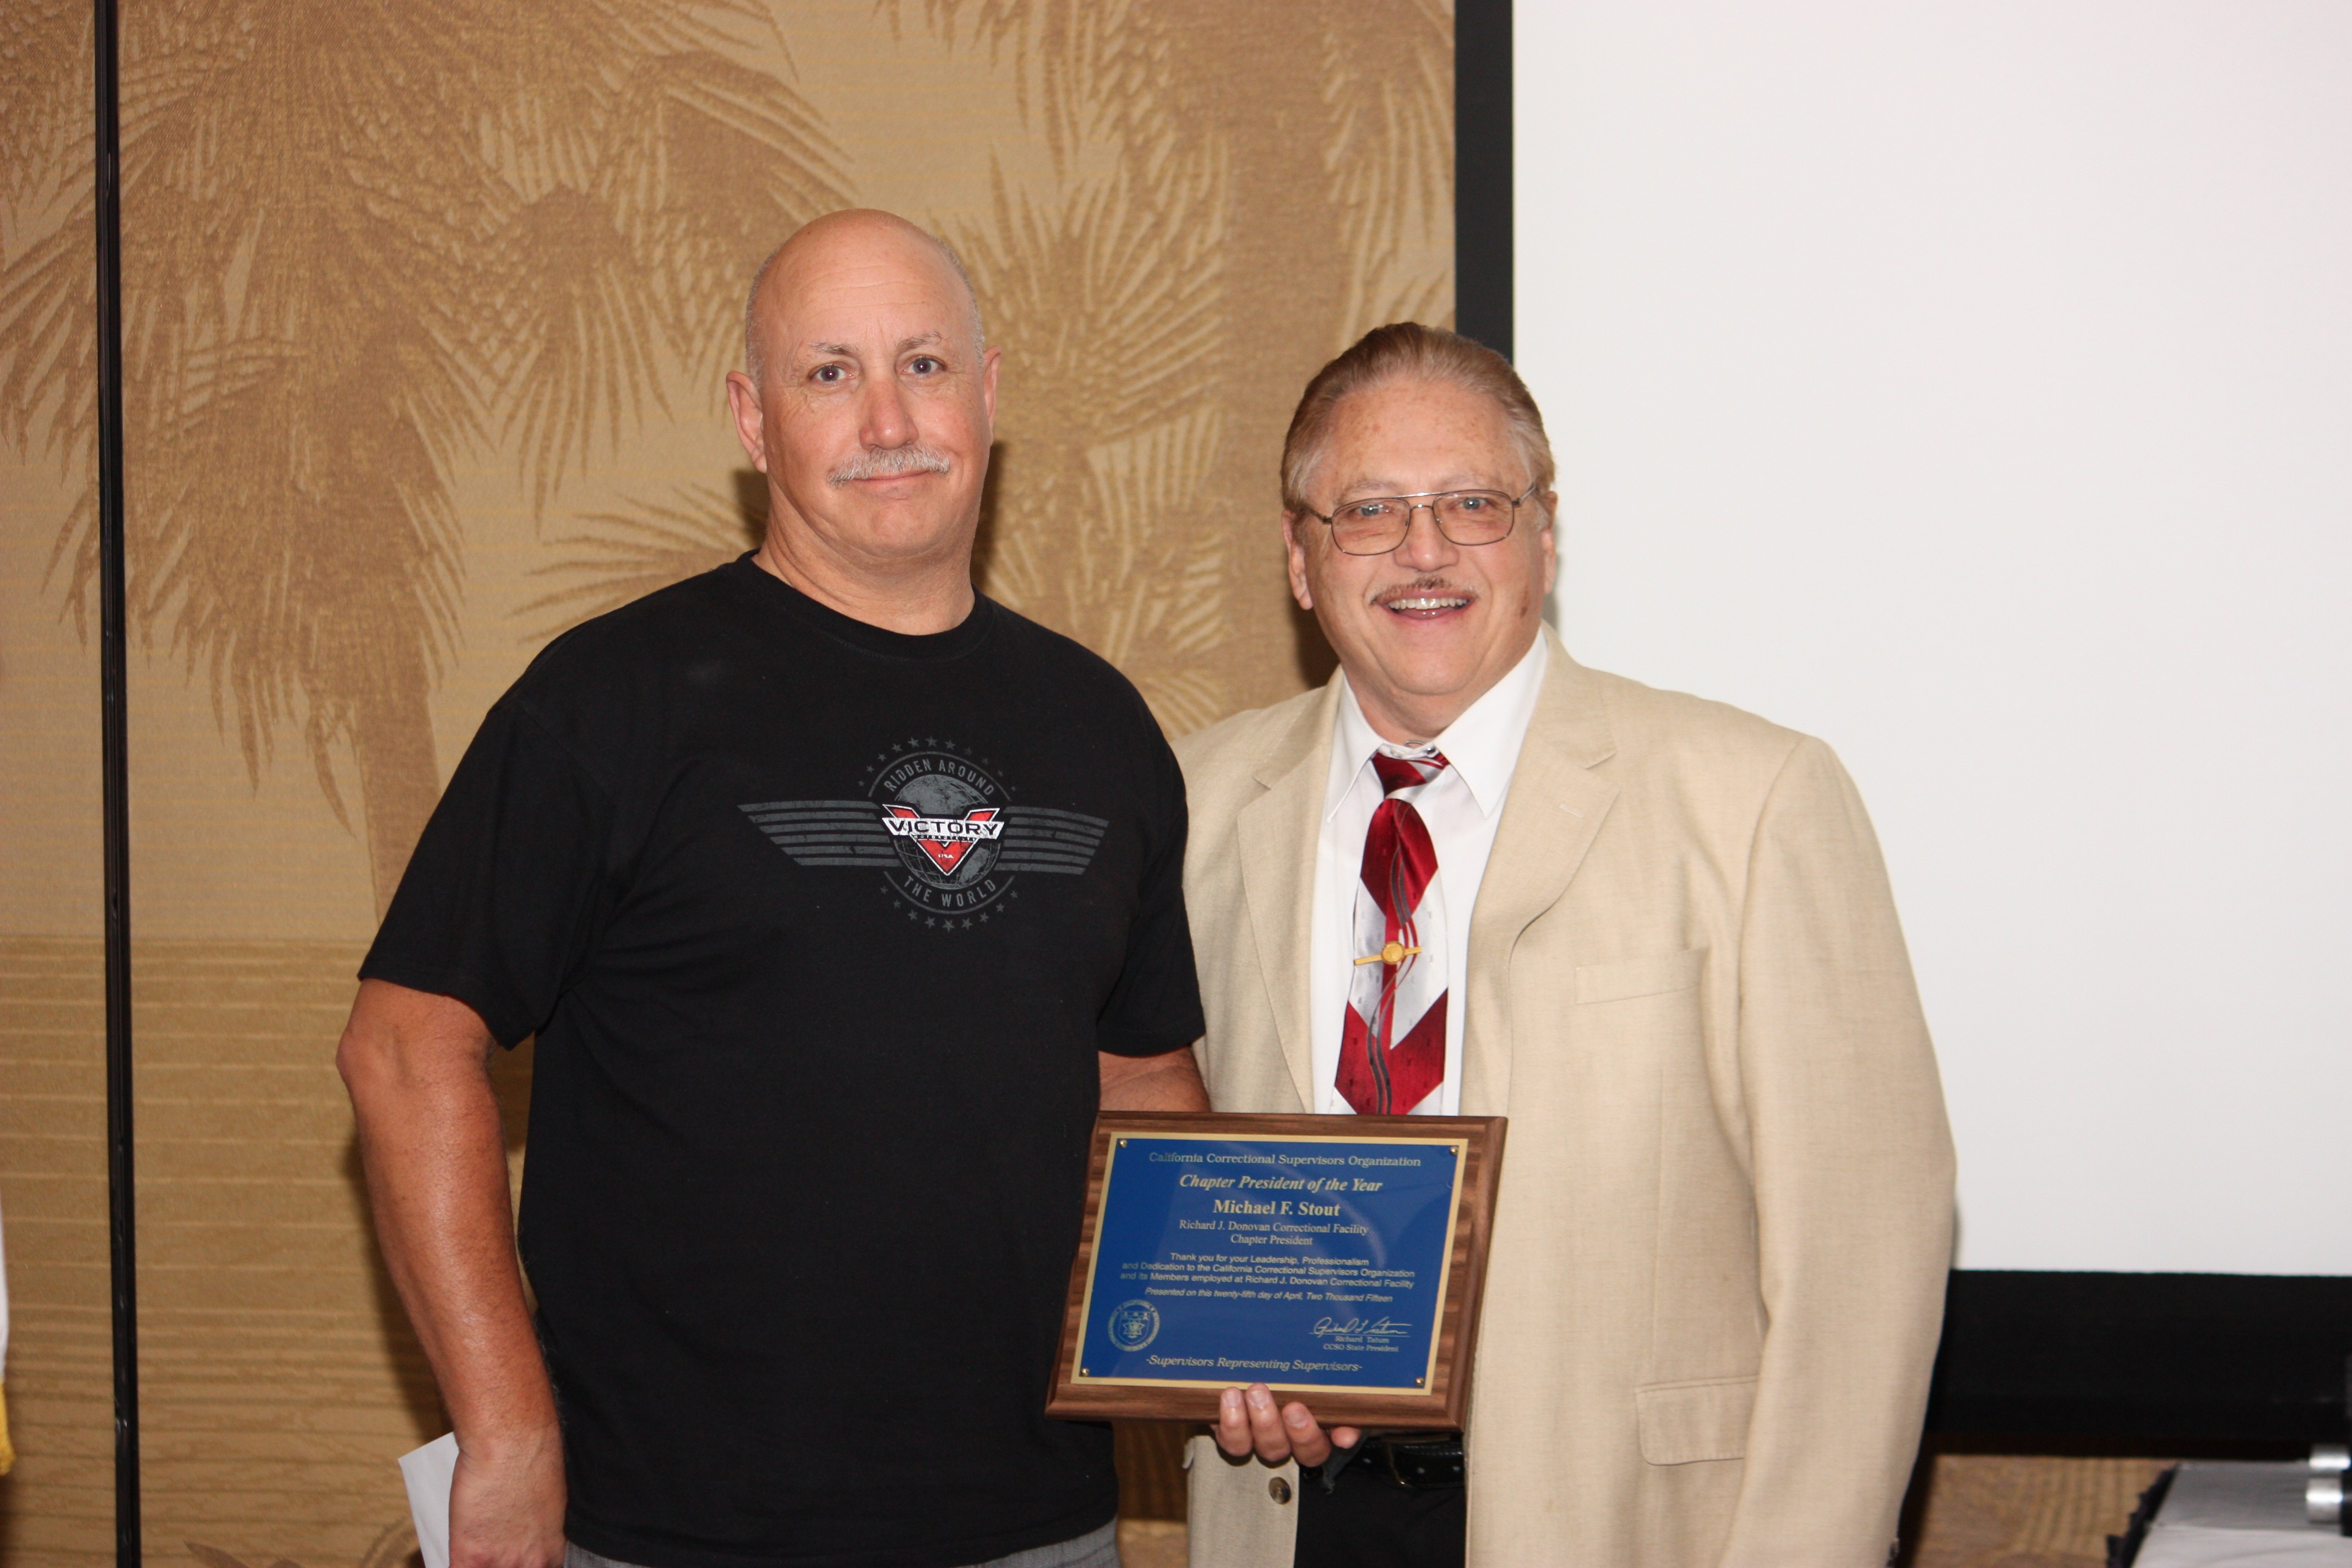 2015 CCSO Chapter President of the Year – Michael Stout (RJD)